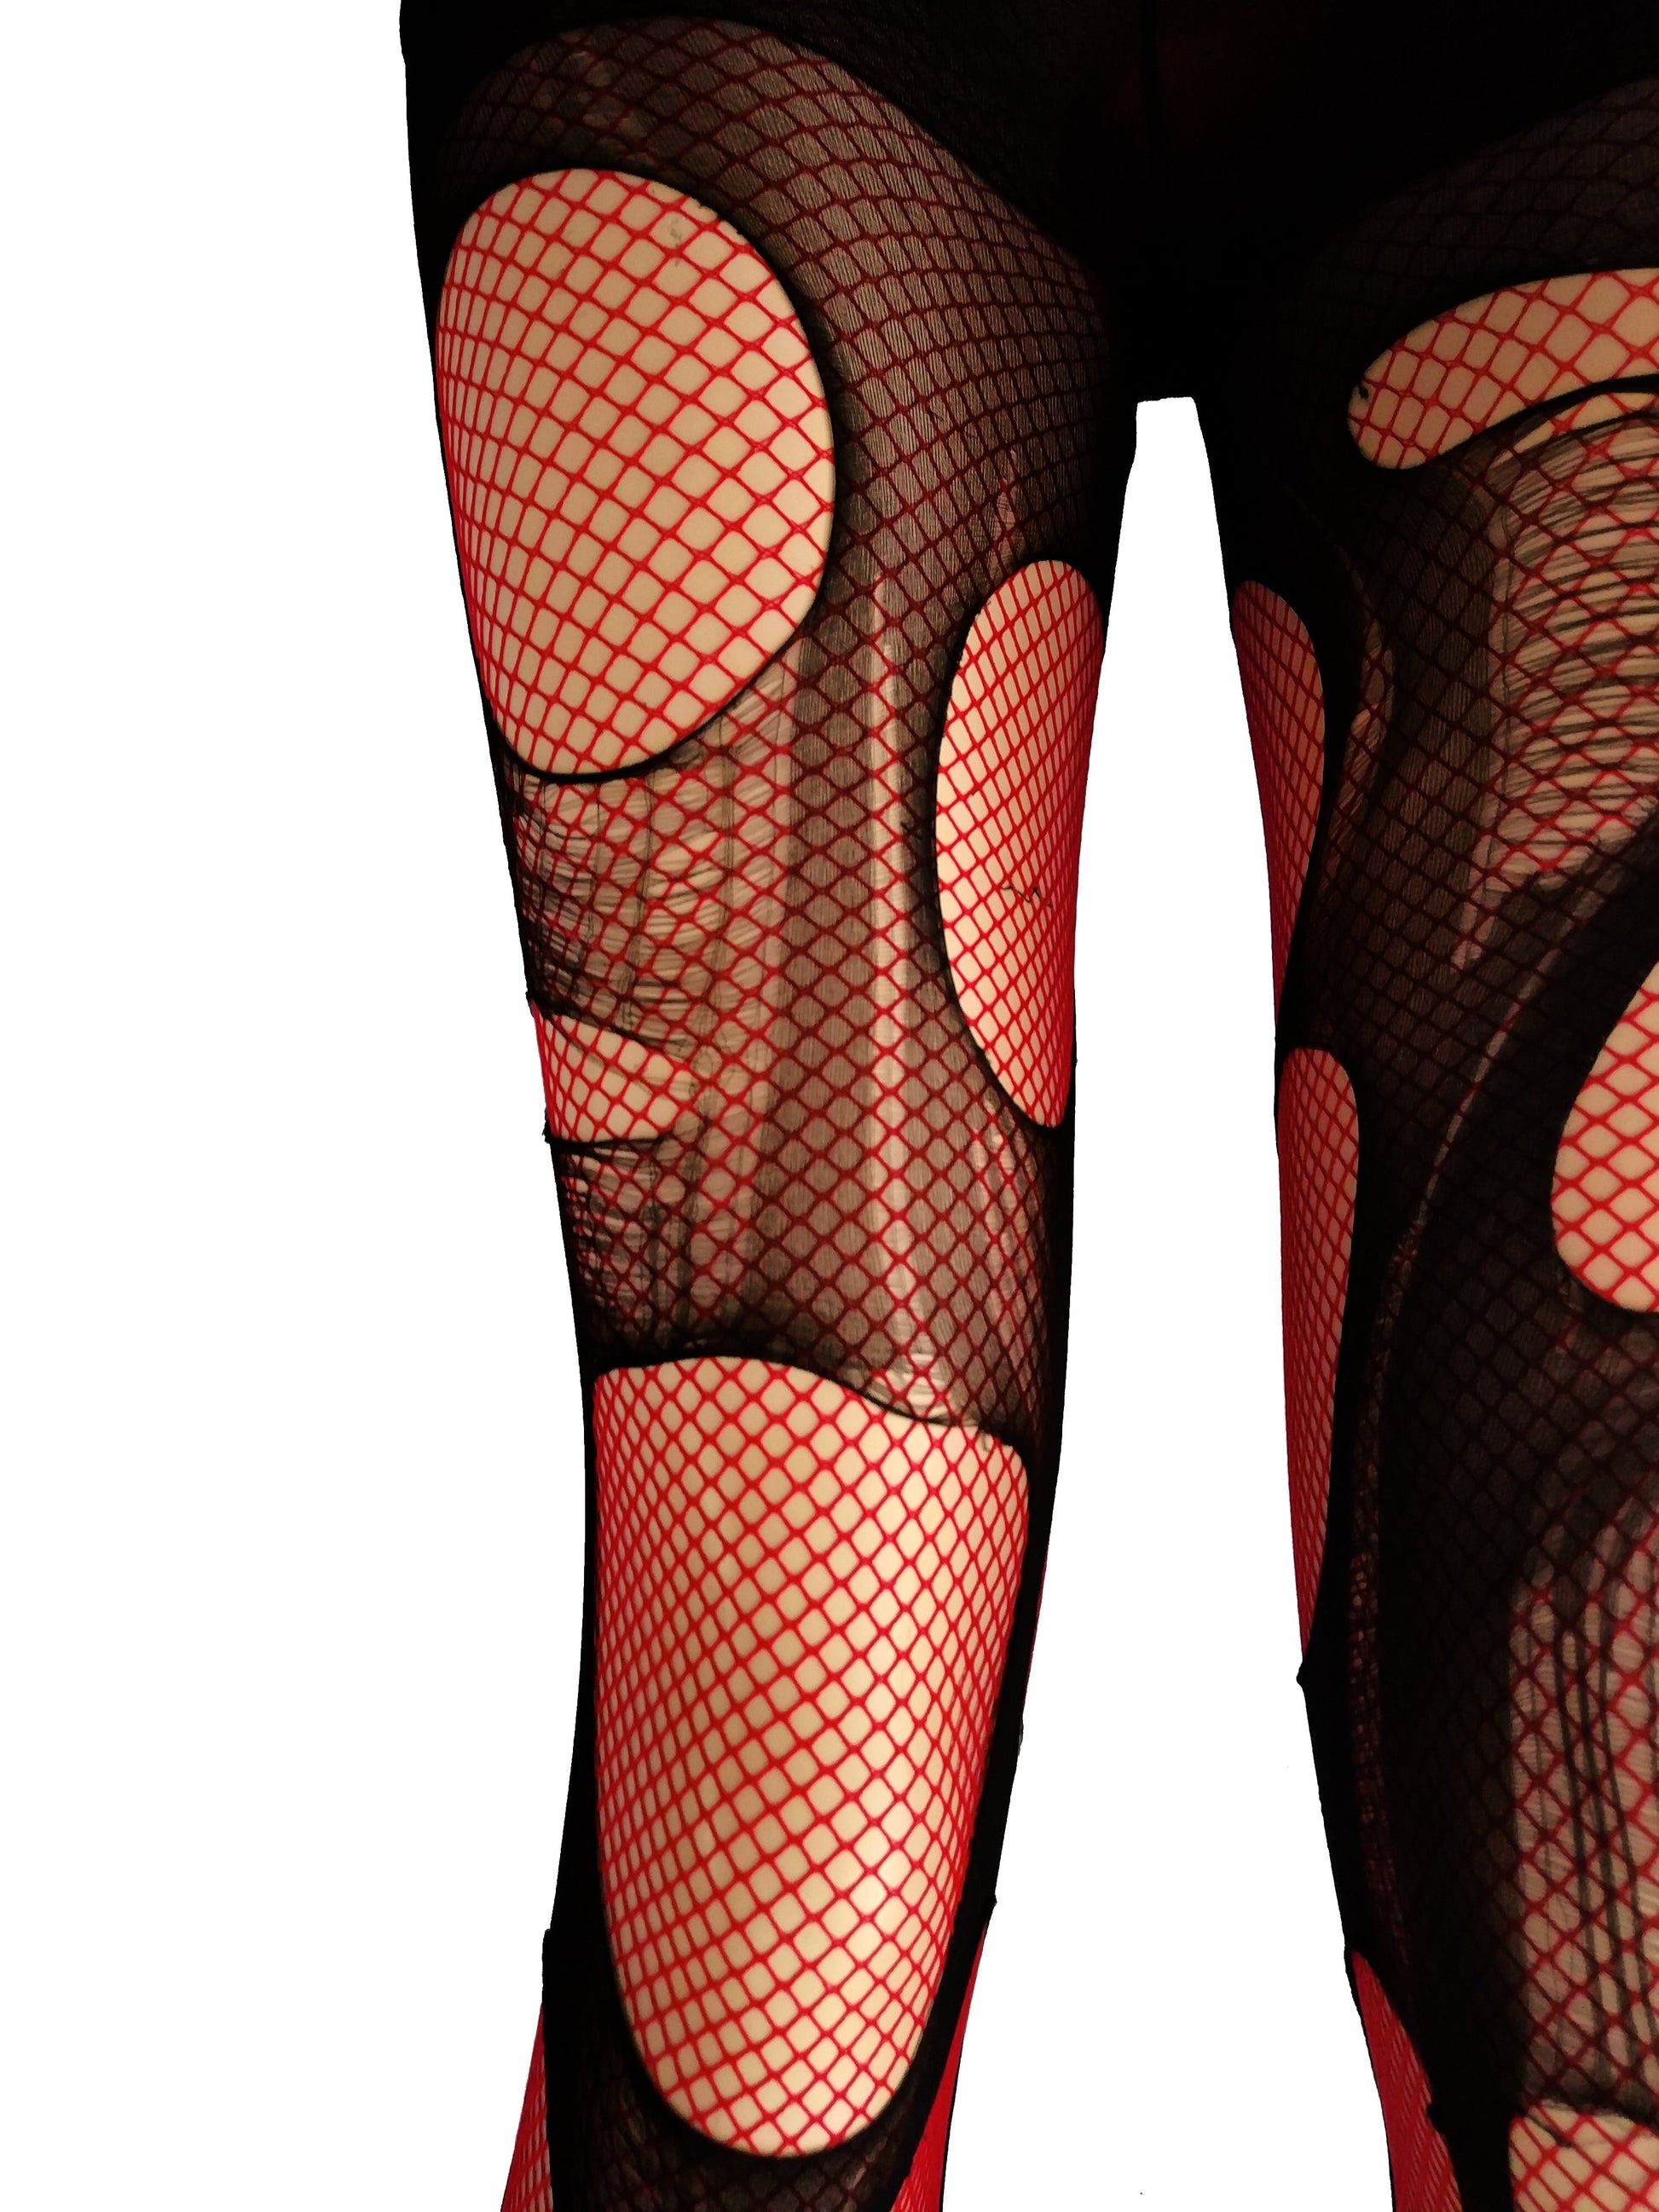 Double Layer Shredded Spandex And Fishnet Tights